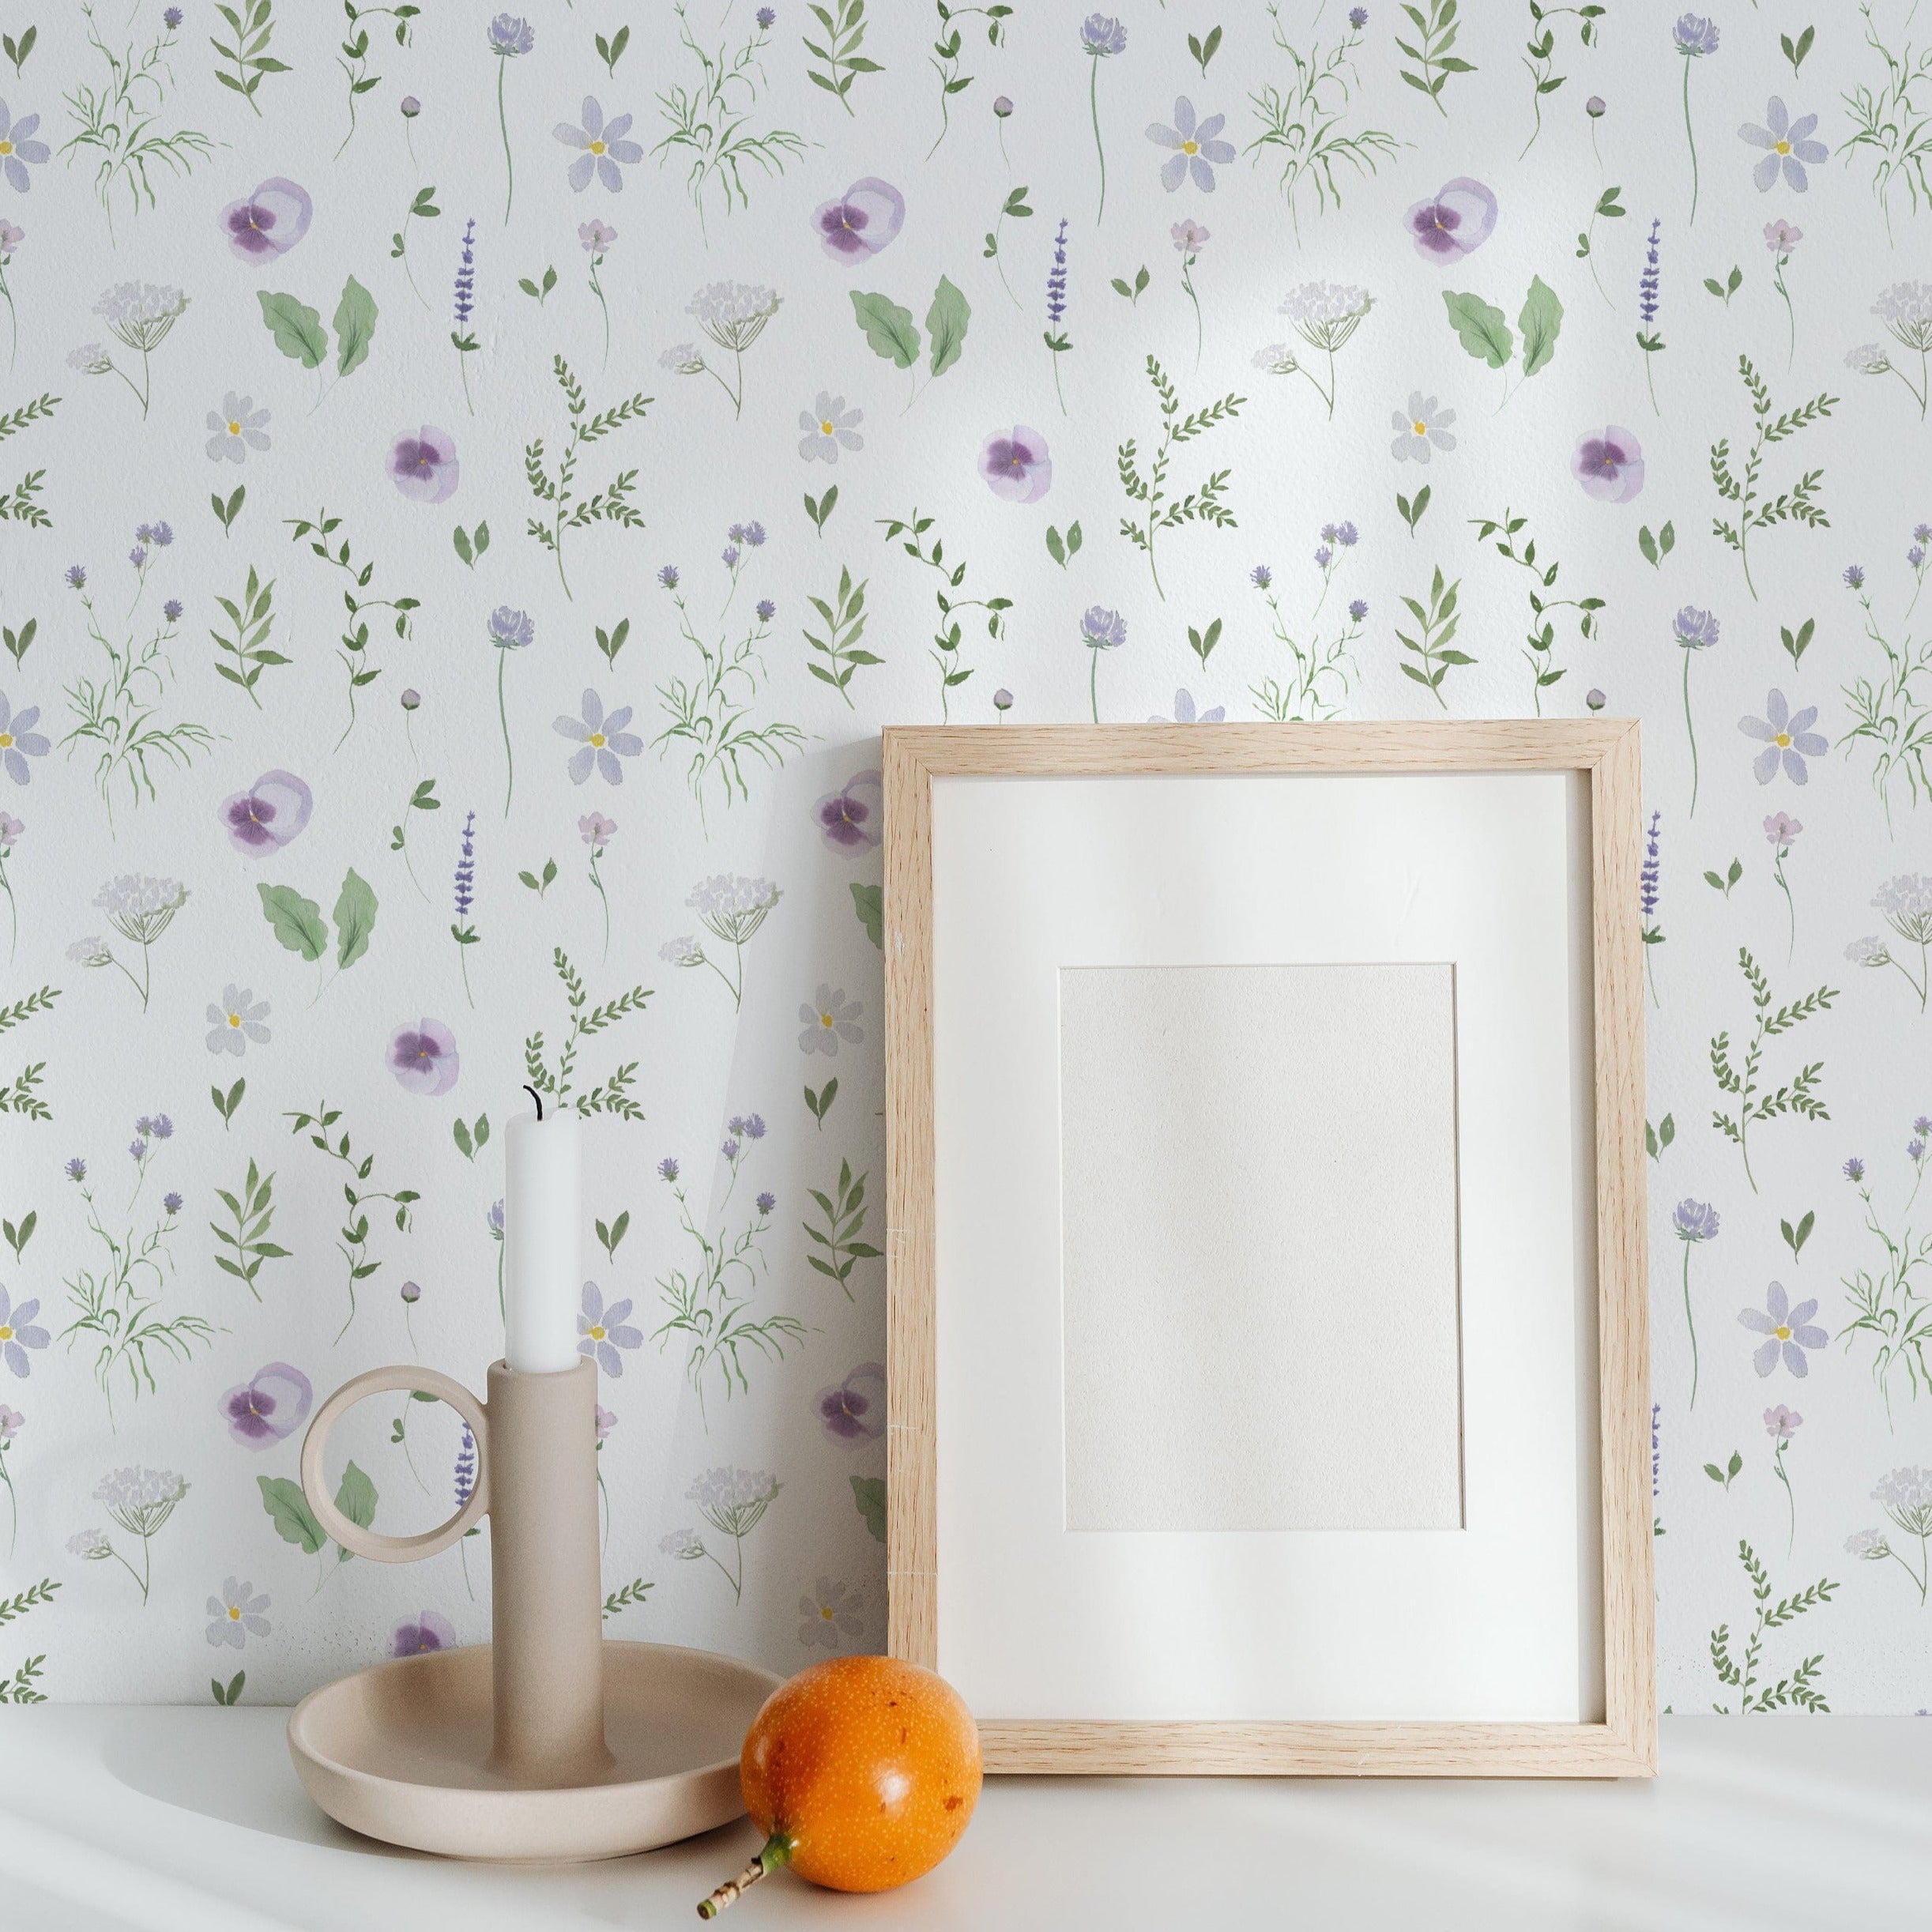 A serene space decorated with the Wildflower Wonder Wallpaper, featuring its delicate wildflower pattern in purple and yellow. The decor includes a framed picture, a candle, and a fresh orange on a white table